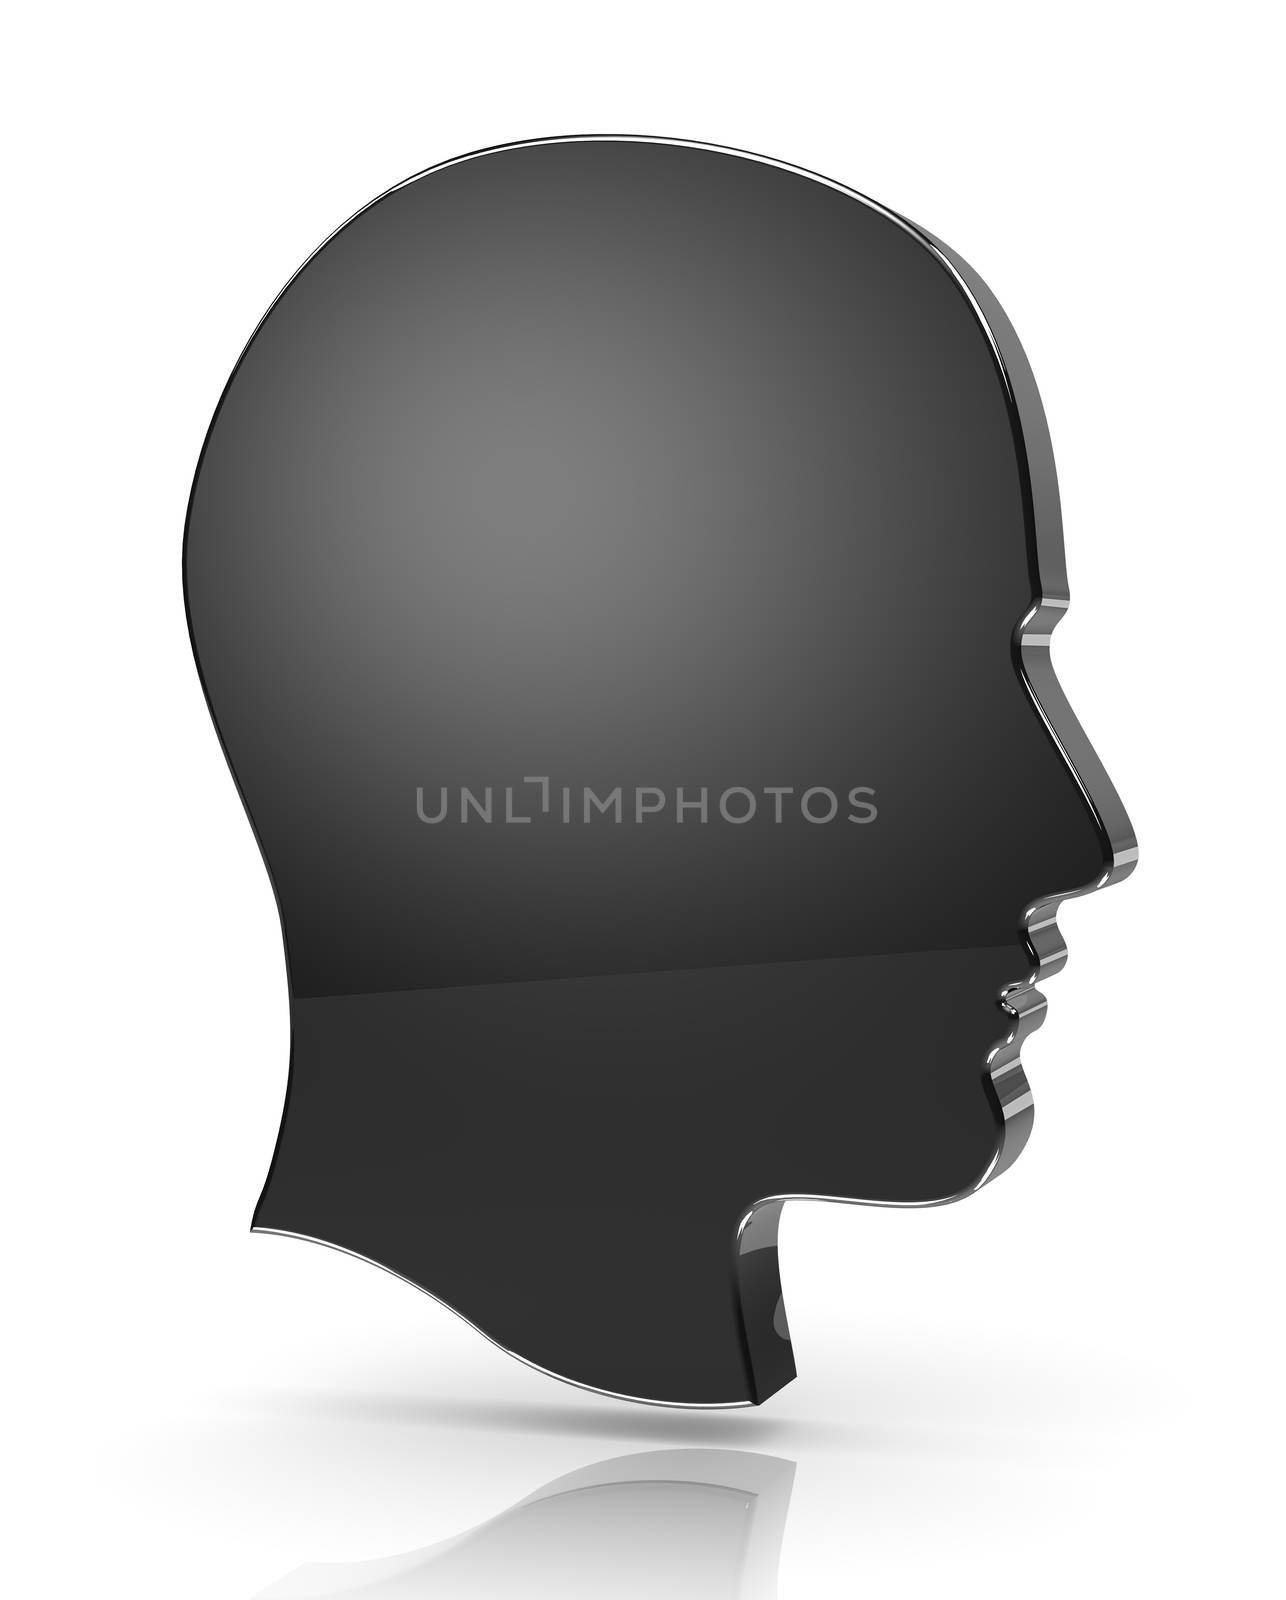 Man Head Profile 3D Silhouette on White Background with Reflection